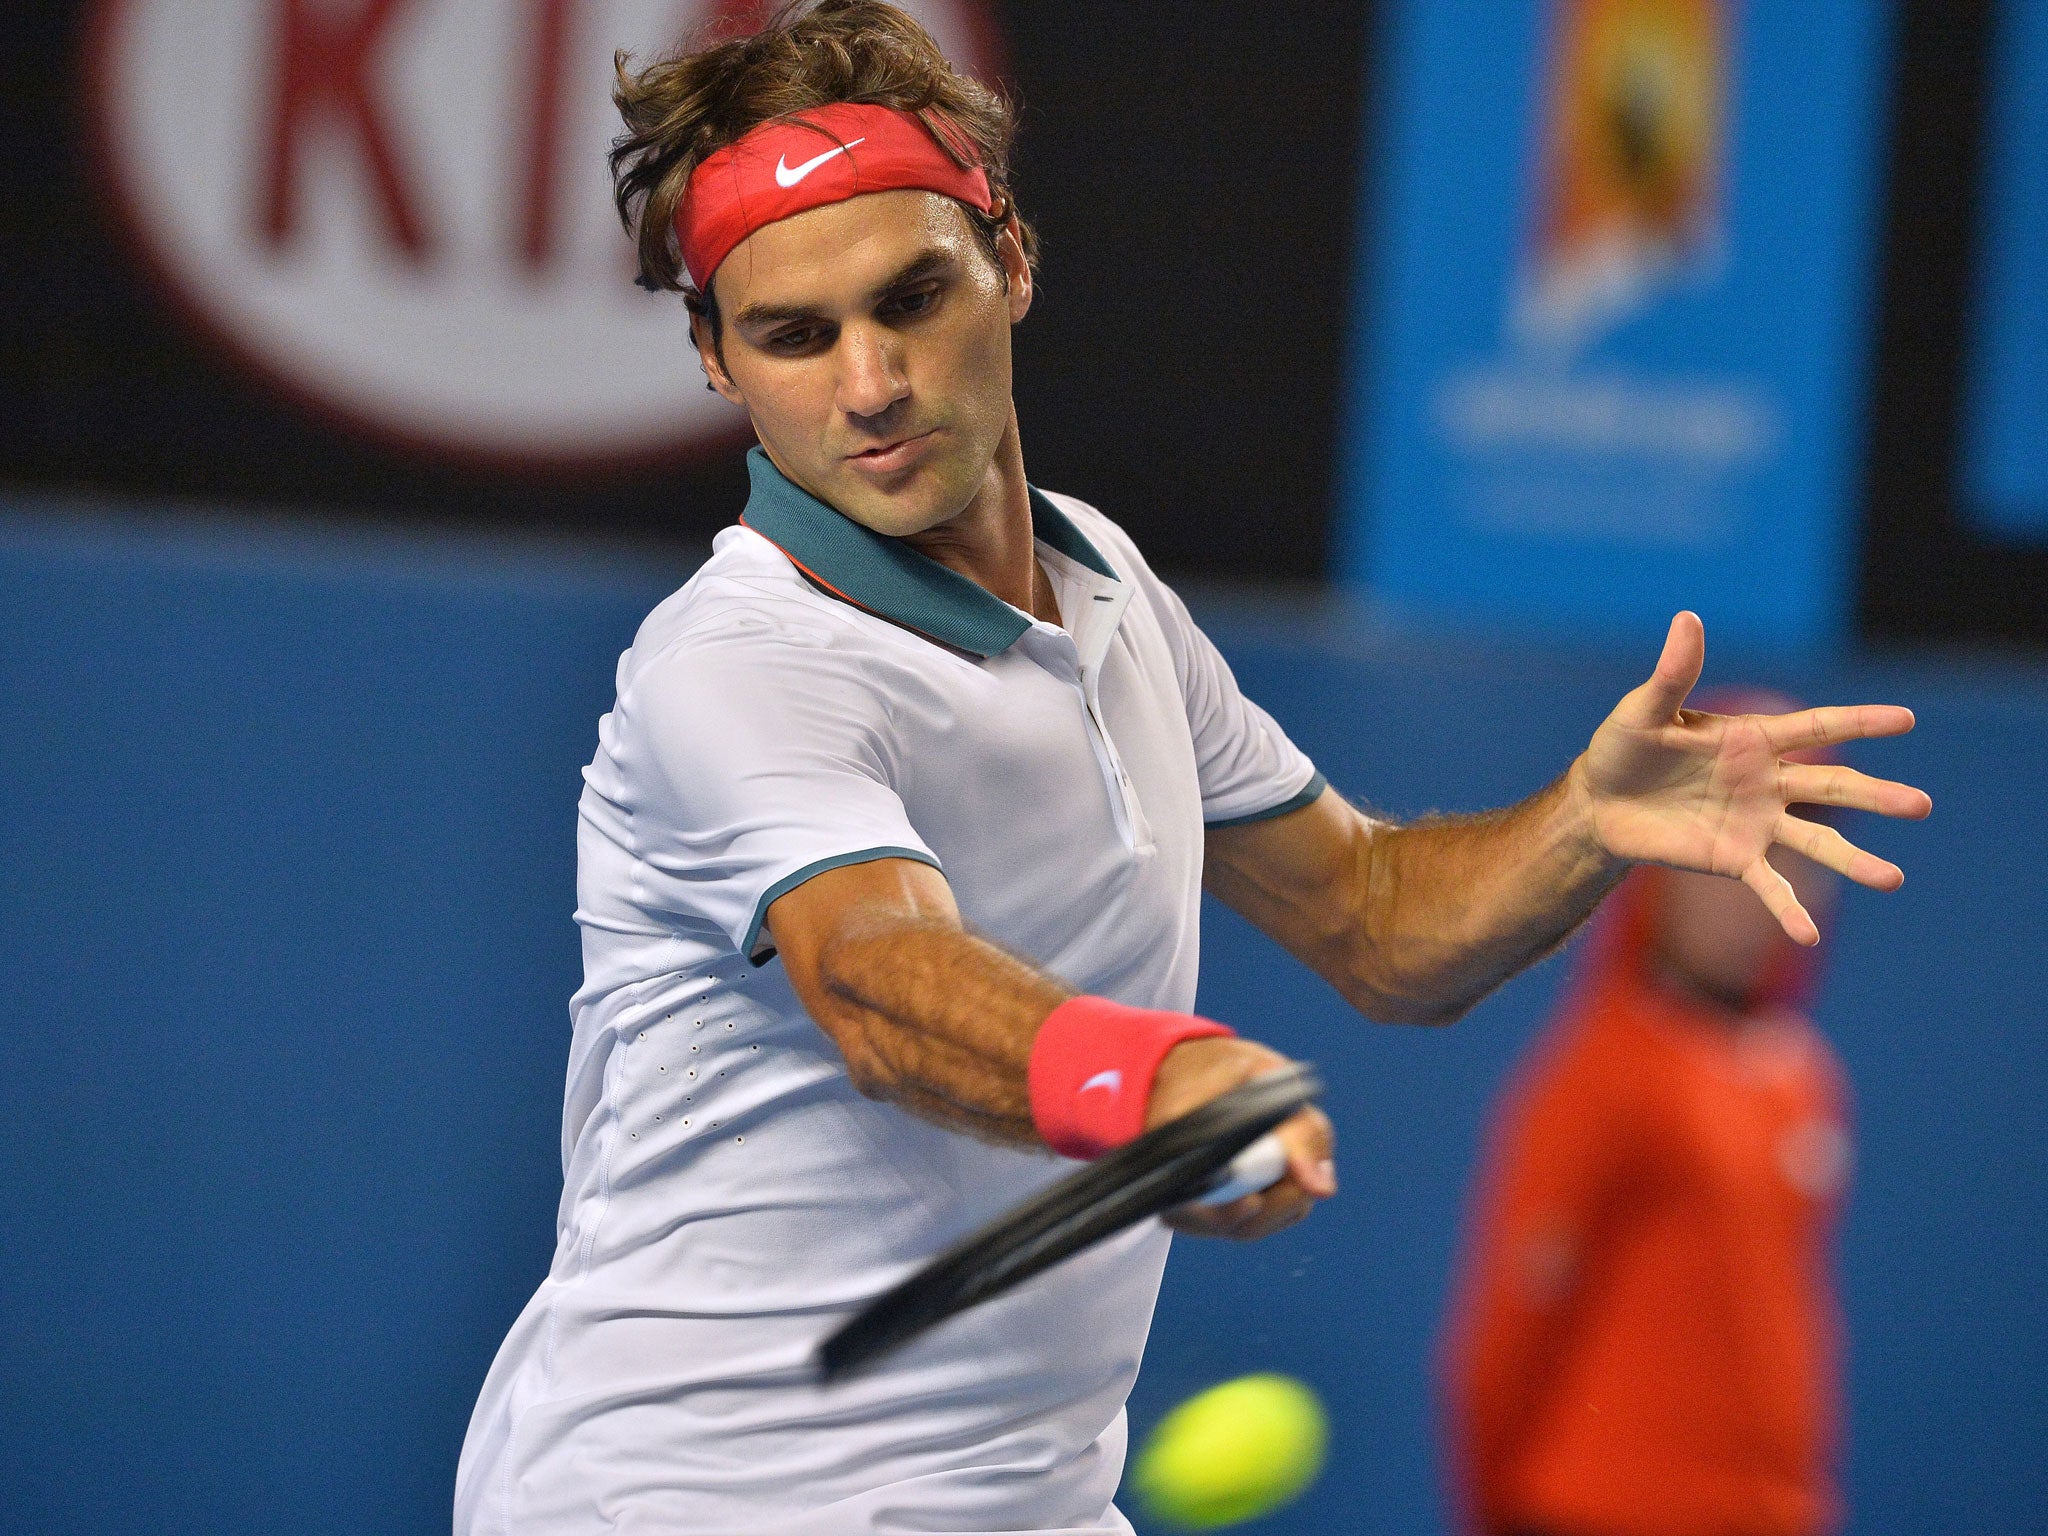 Roger Federer came through his first match away from the Rod Laver Arena in 10 years by defeating Blaz Kavcic at the Australian Open